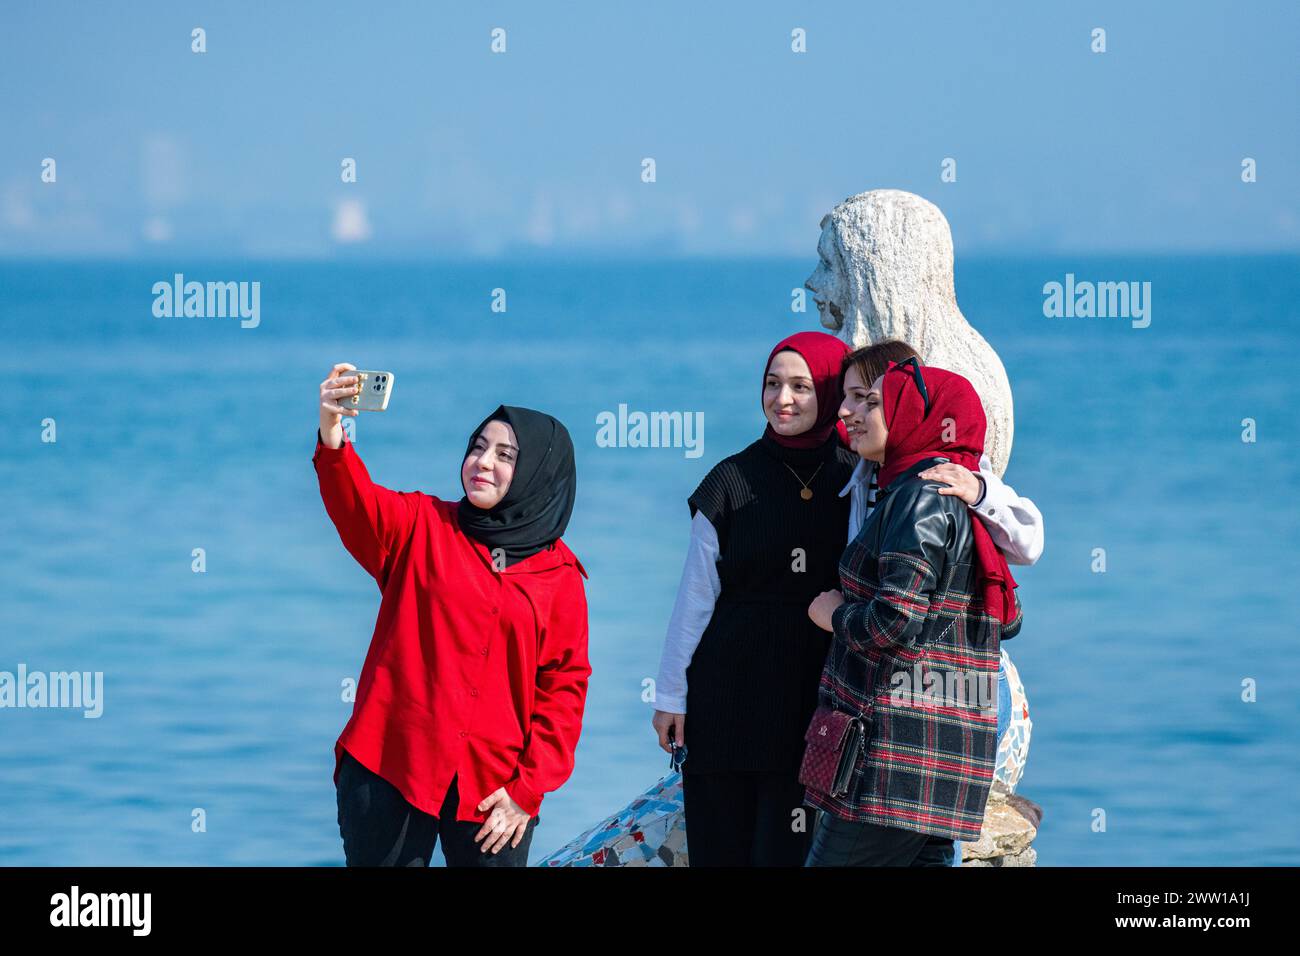 Muslim girls enjpoy the sunshine with a selfie with a statue of a mermaid on Princes Island, an archipelago near Istanbul city centre in Turkey Stock Photo